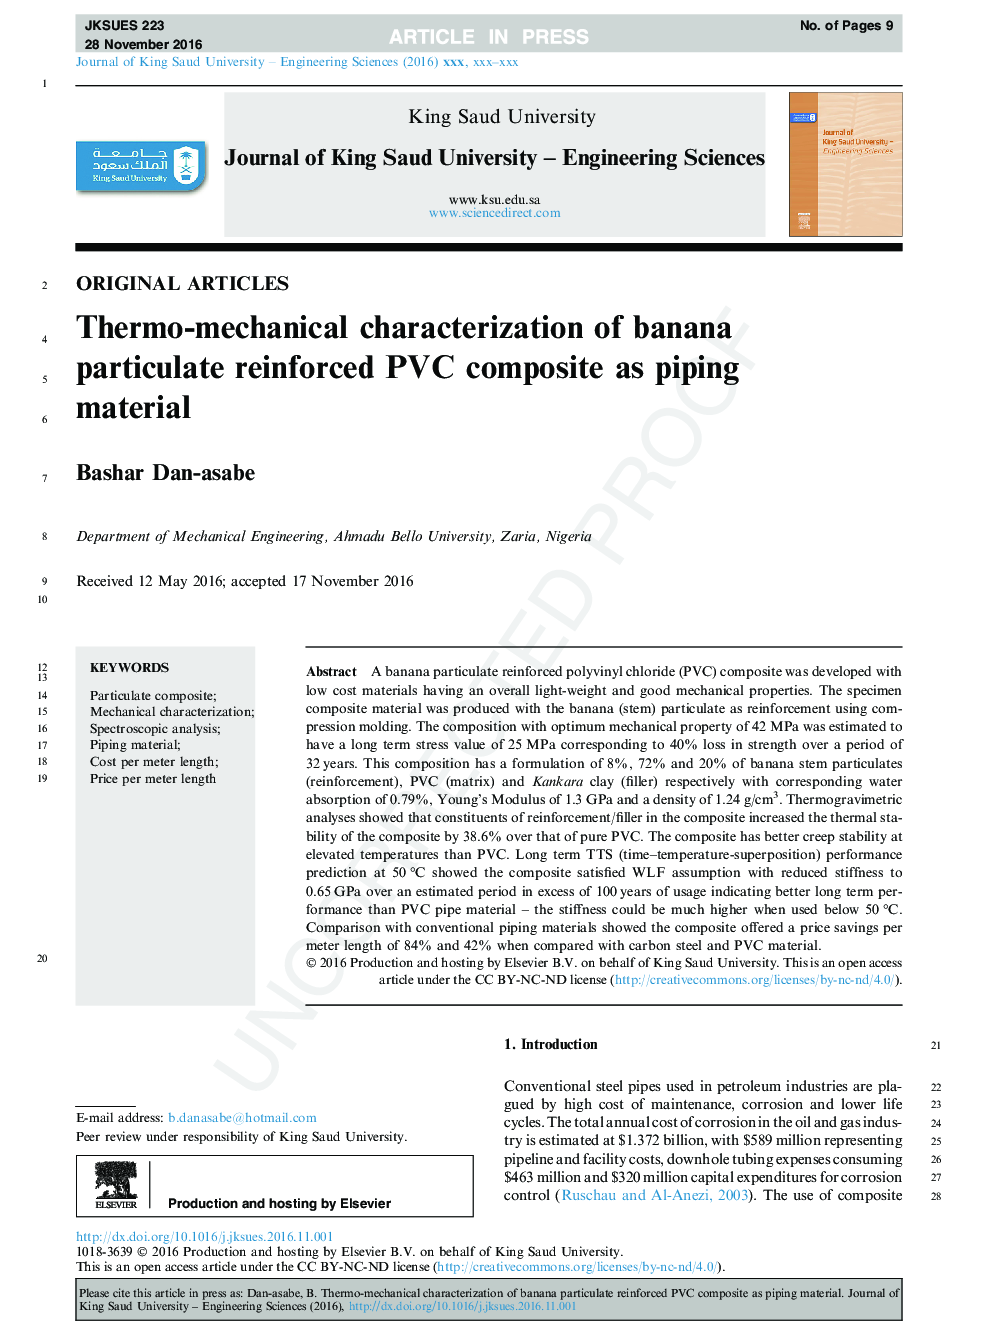 Thermo-mechanical characterization of banana particulate reinforced PVC composite as piping material